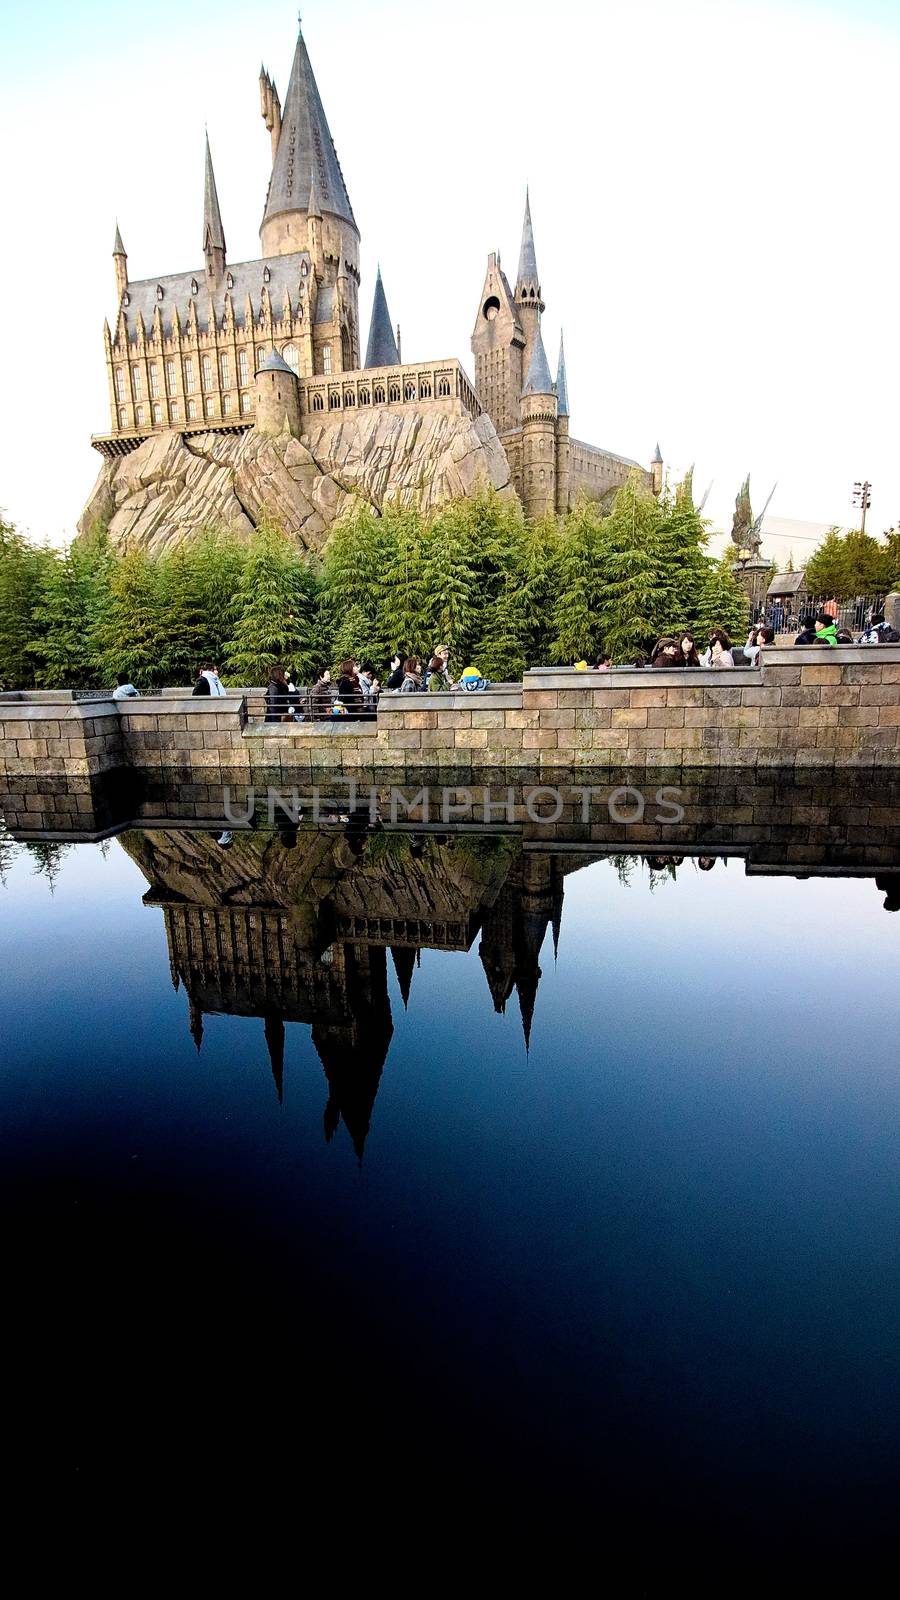 Osaka, Japan - Dec 02, 2017: View of Hogwarts castle at the Wizarding World of Harry Potter in Universal Studios Japan. by USA-TARO